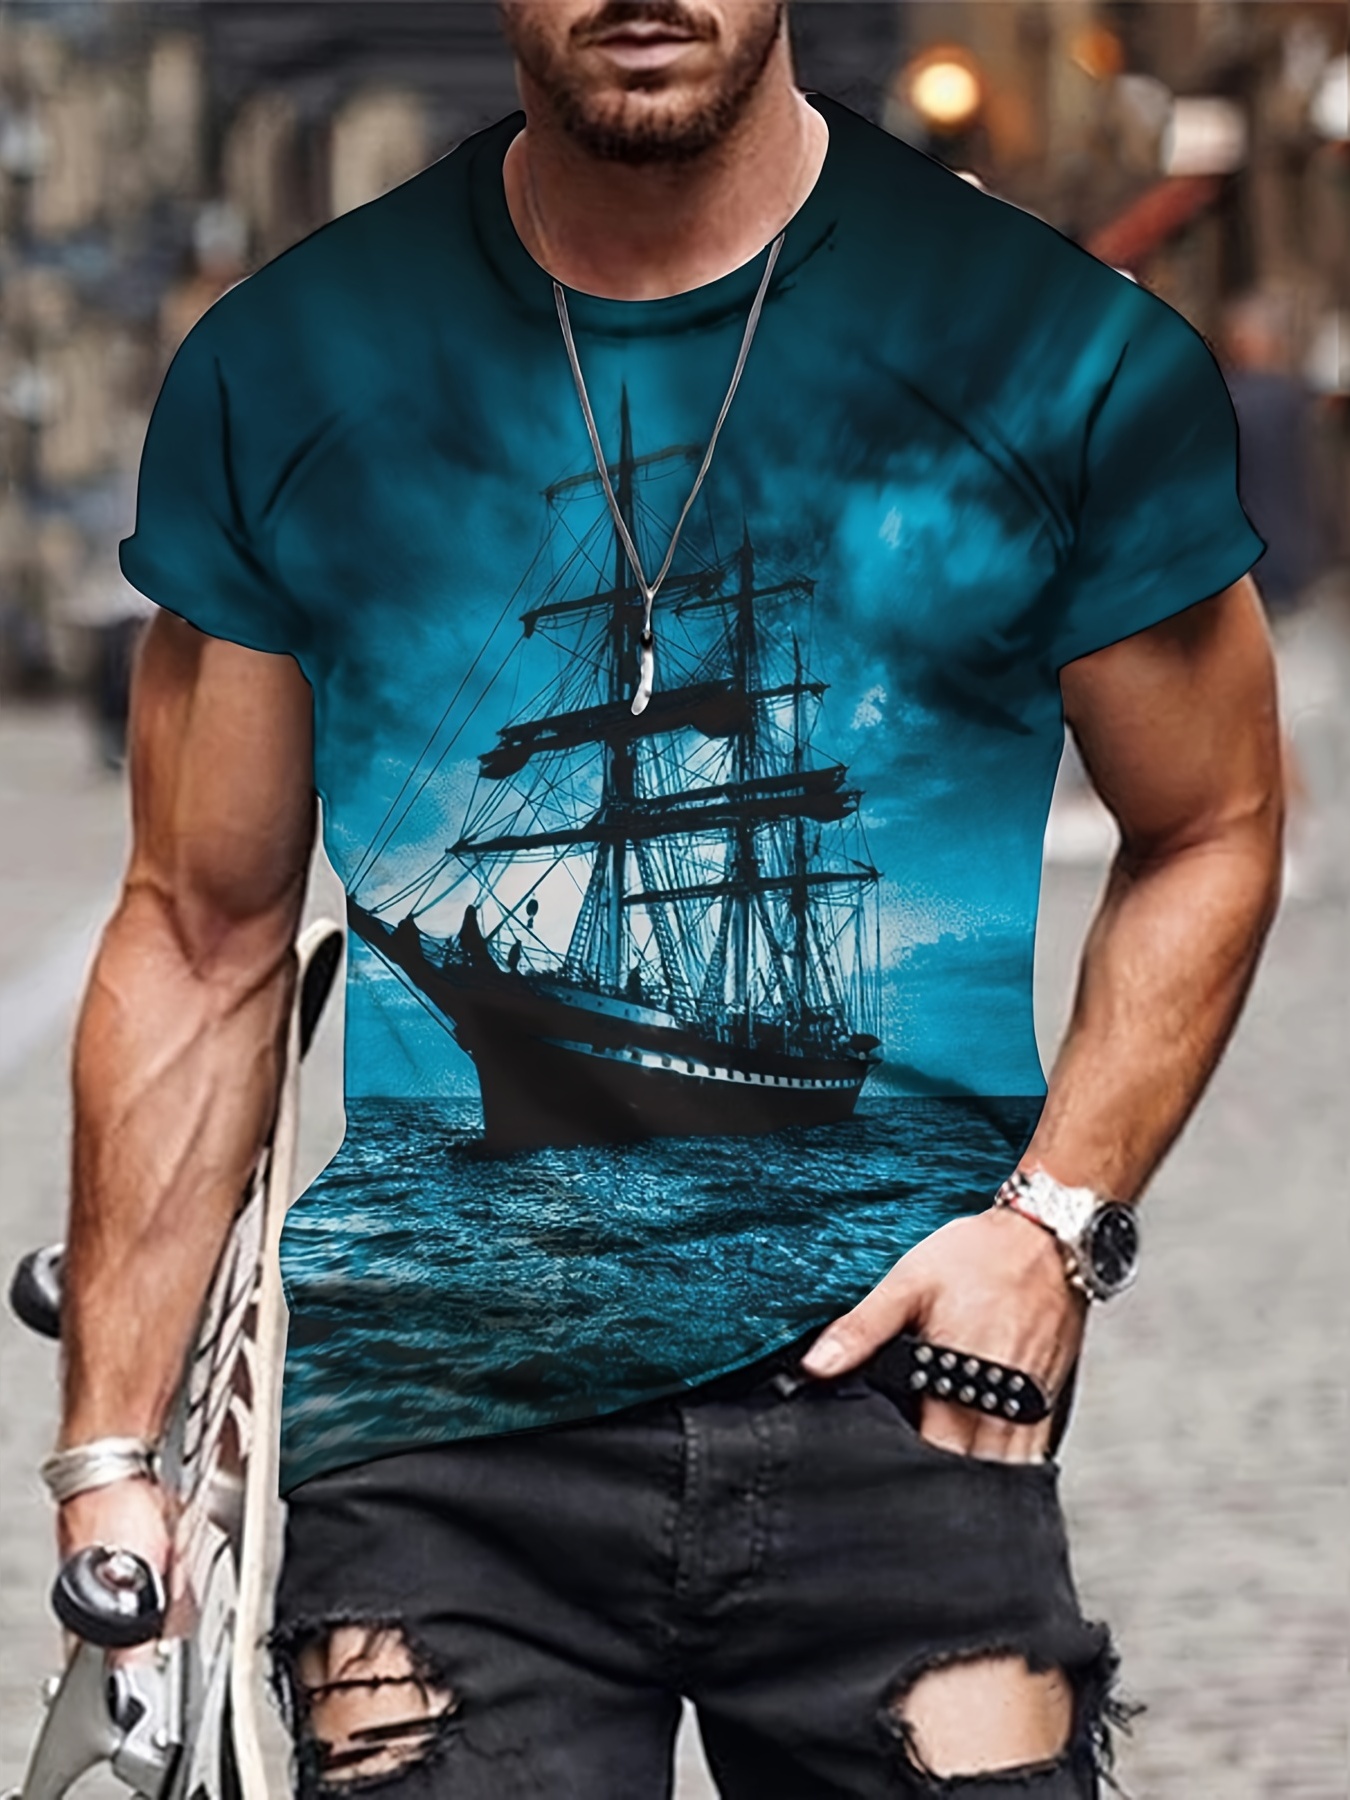 Sailing Ship Print, Men's Graphic Design Crew Neck Novel T-shirt, Casual Comfy Tees Tshirts For Summer, Men's Clothing Tops For Daily Vacation